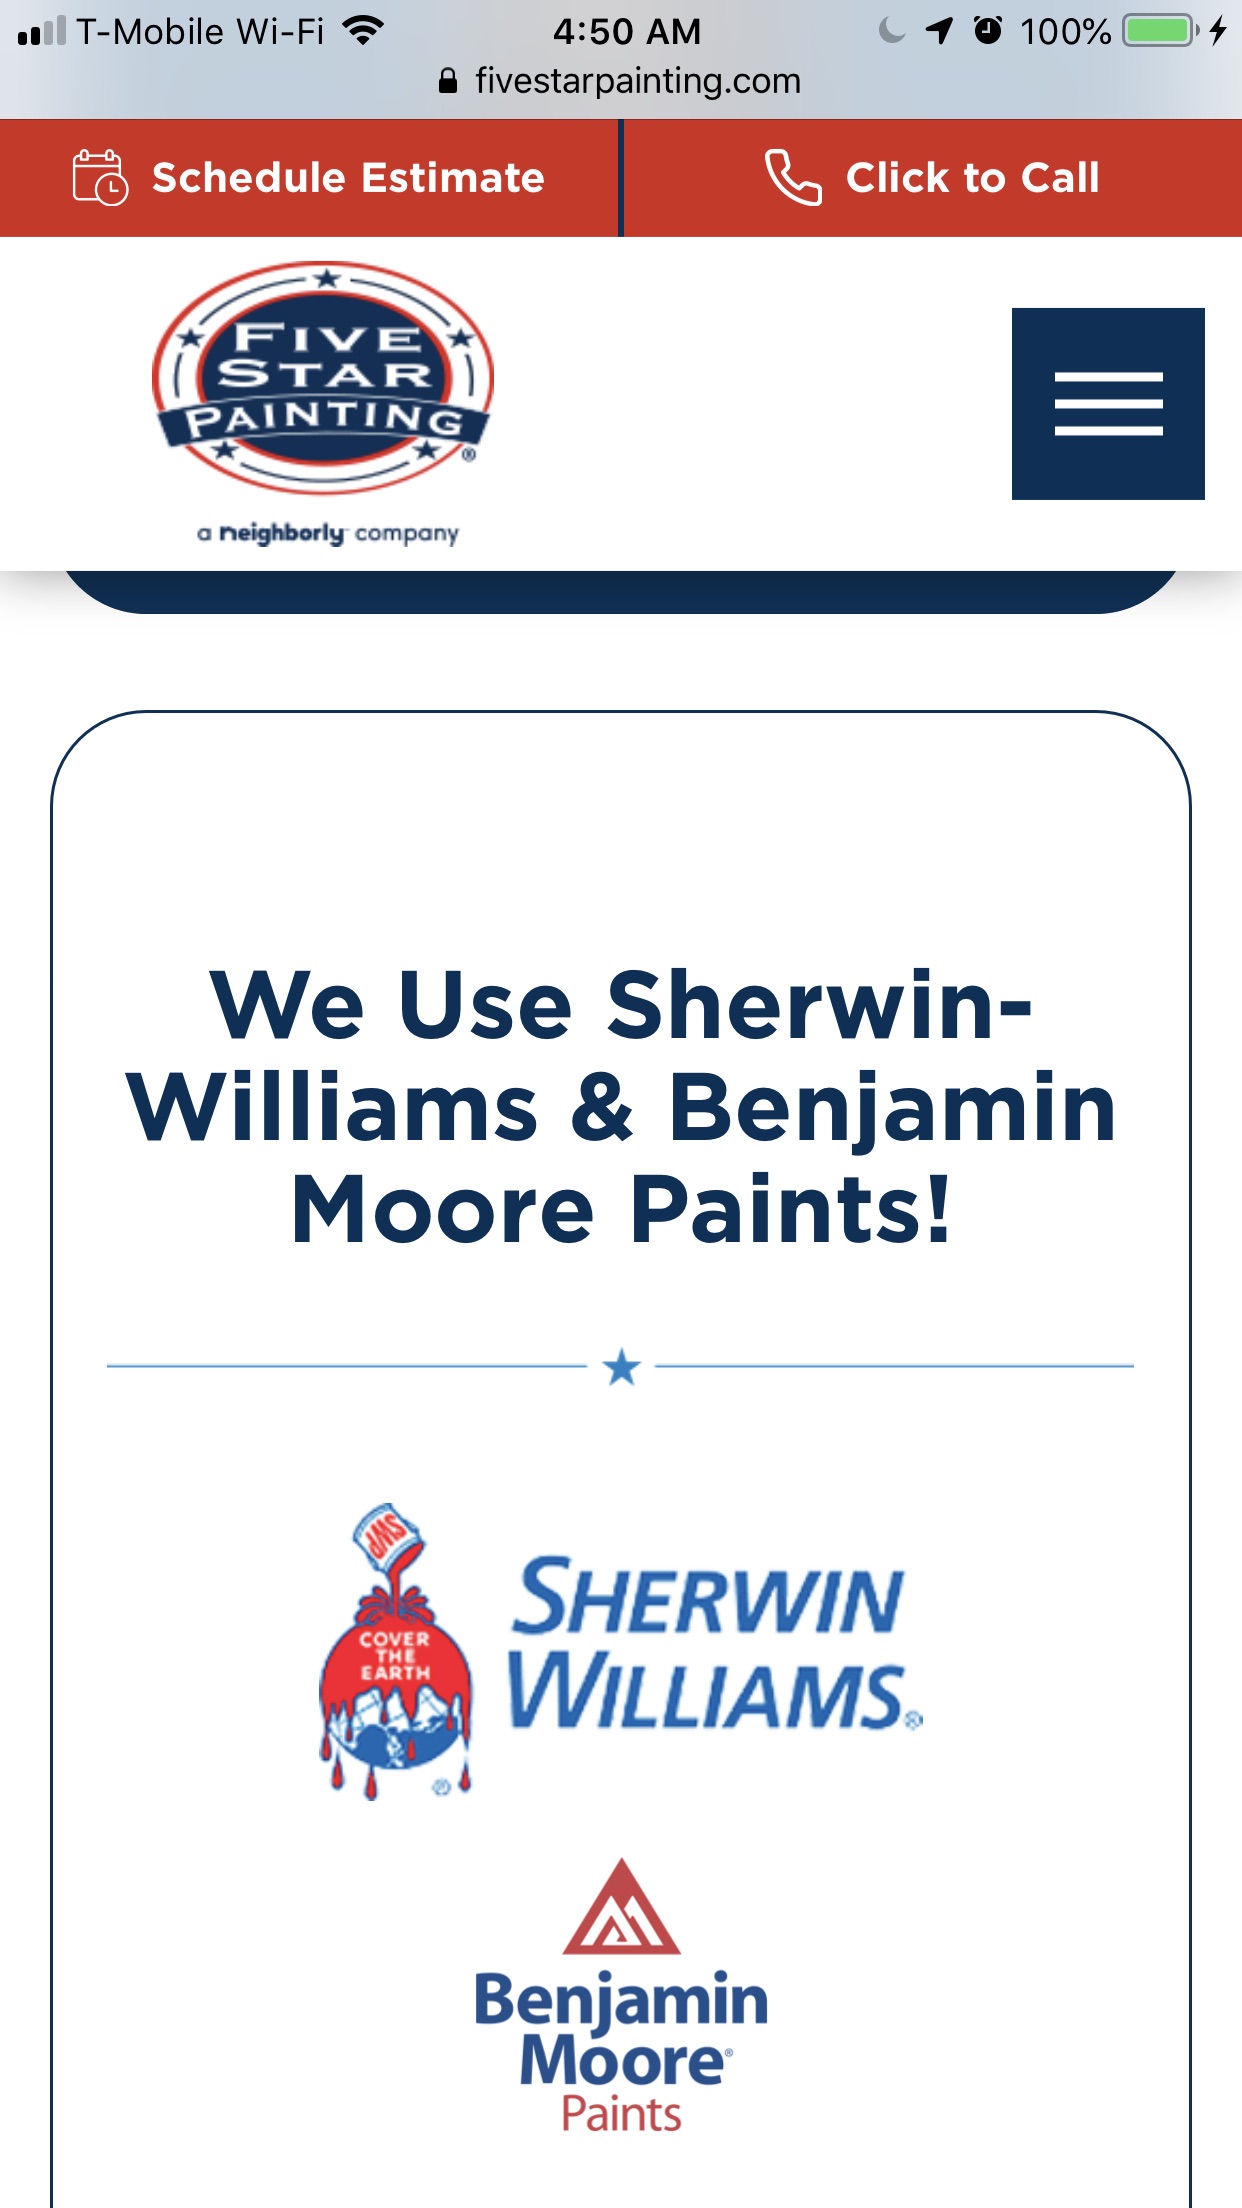 He advertises that he uses Sherwin Williams